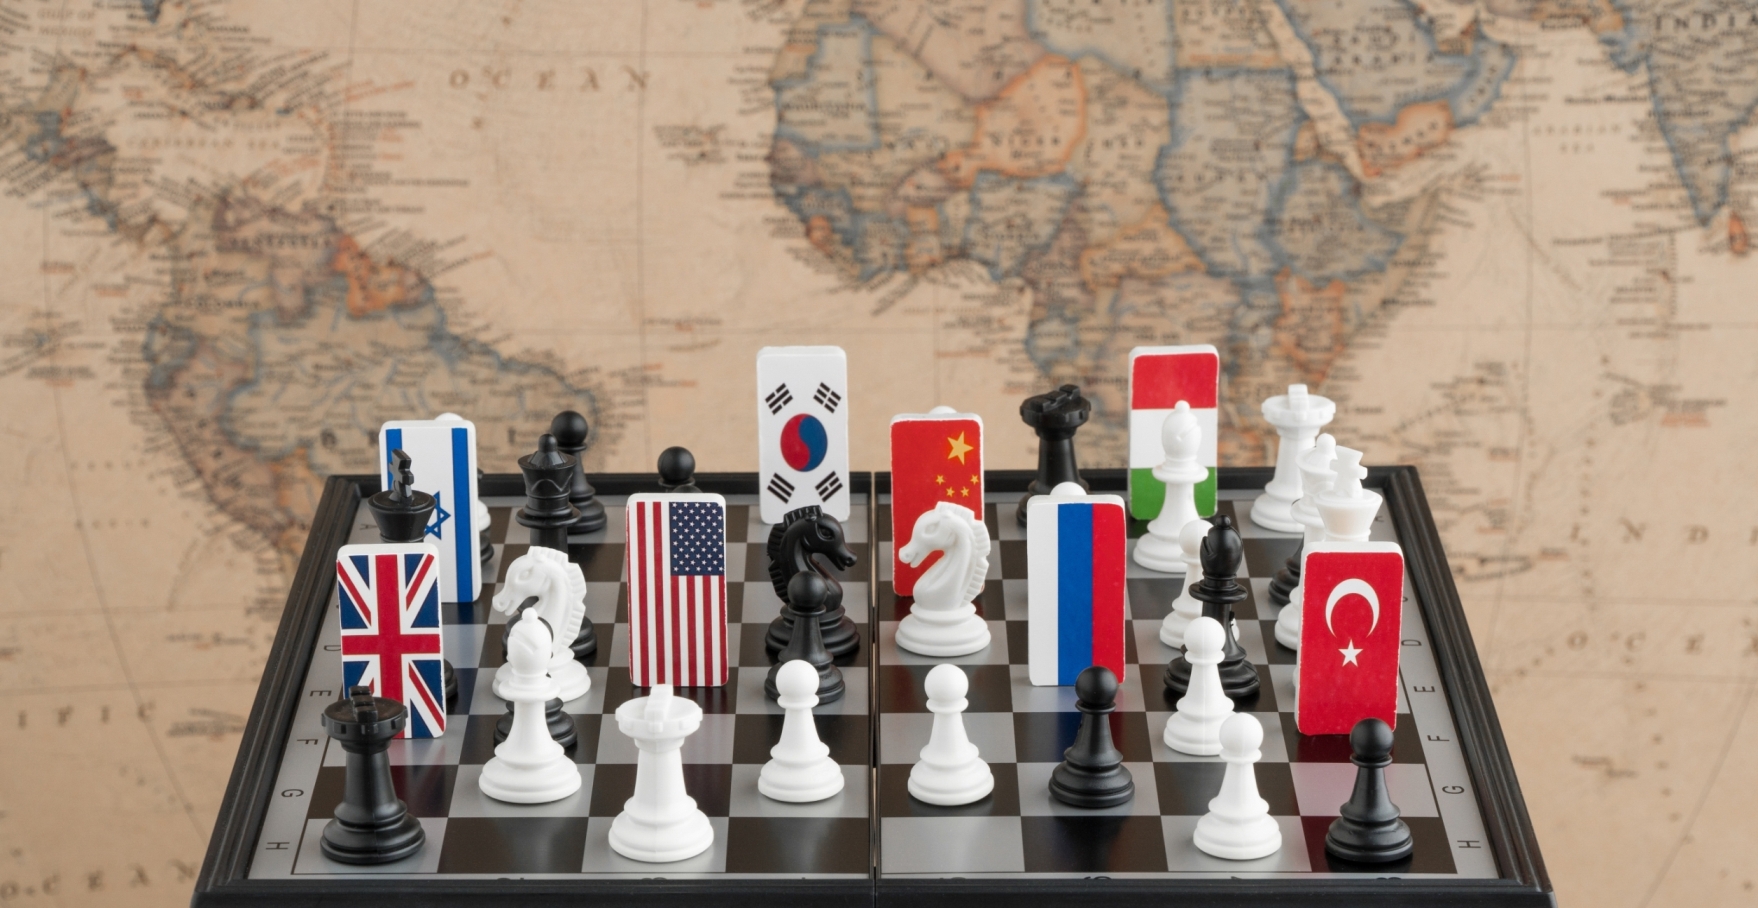 Flags and Chess Figures on a Chess Board; Map in the Background